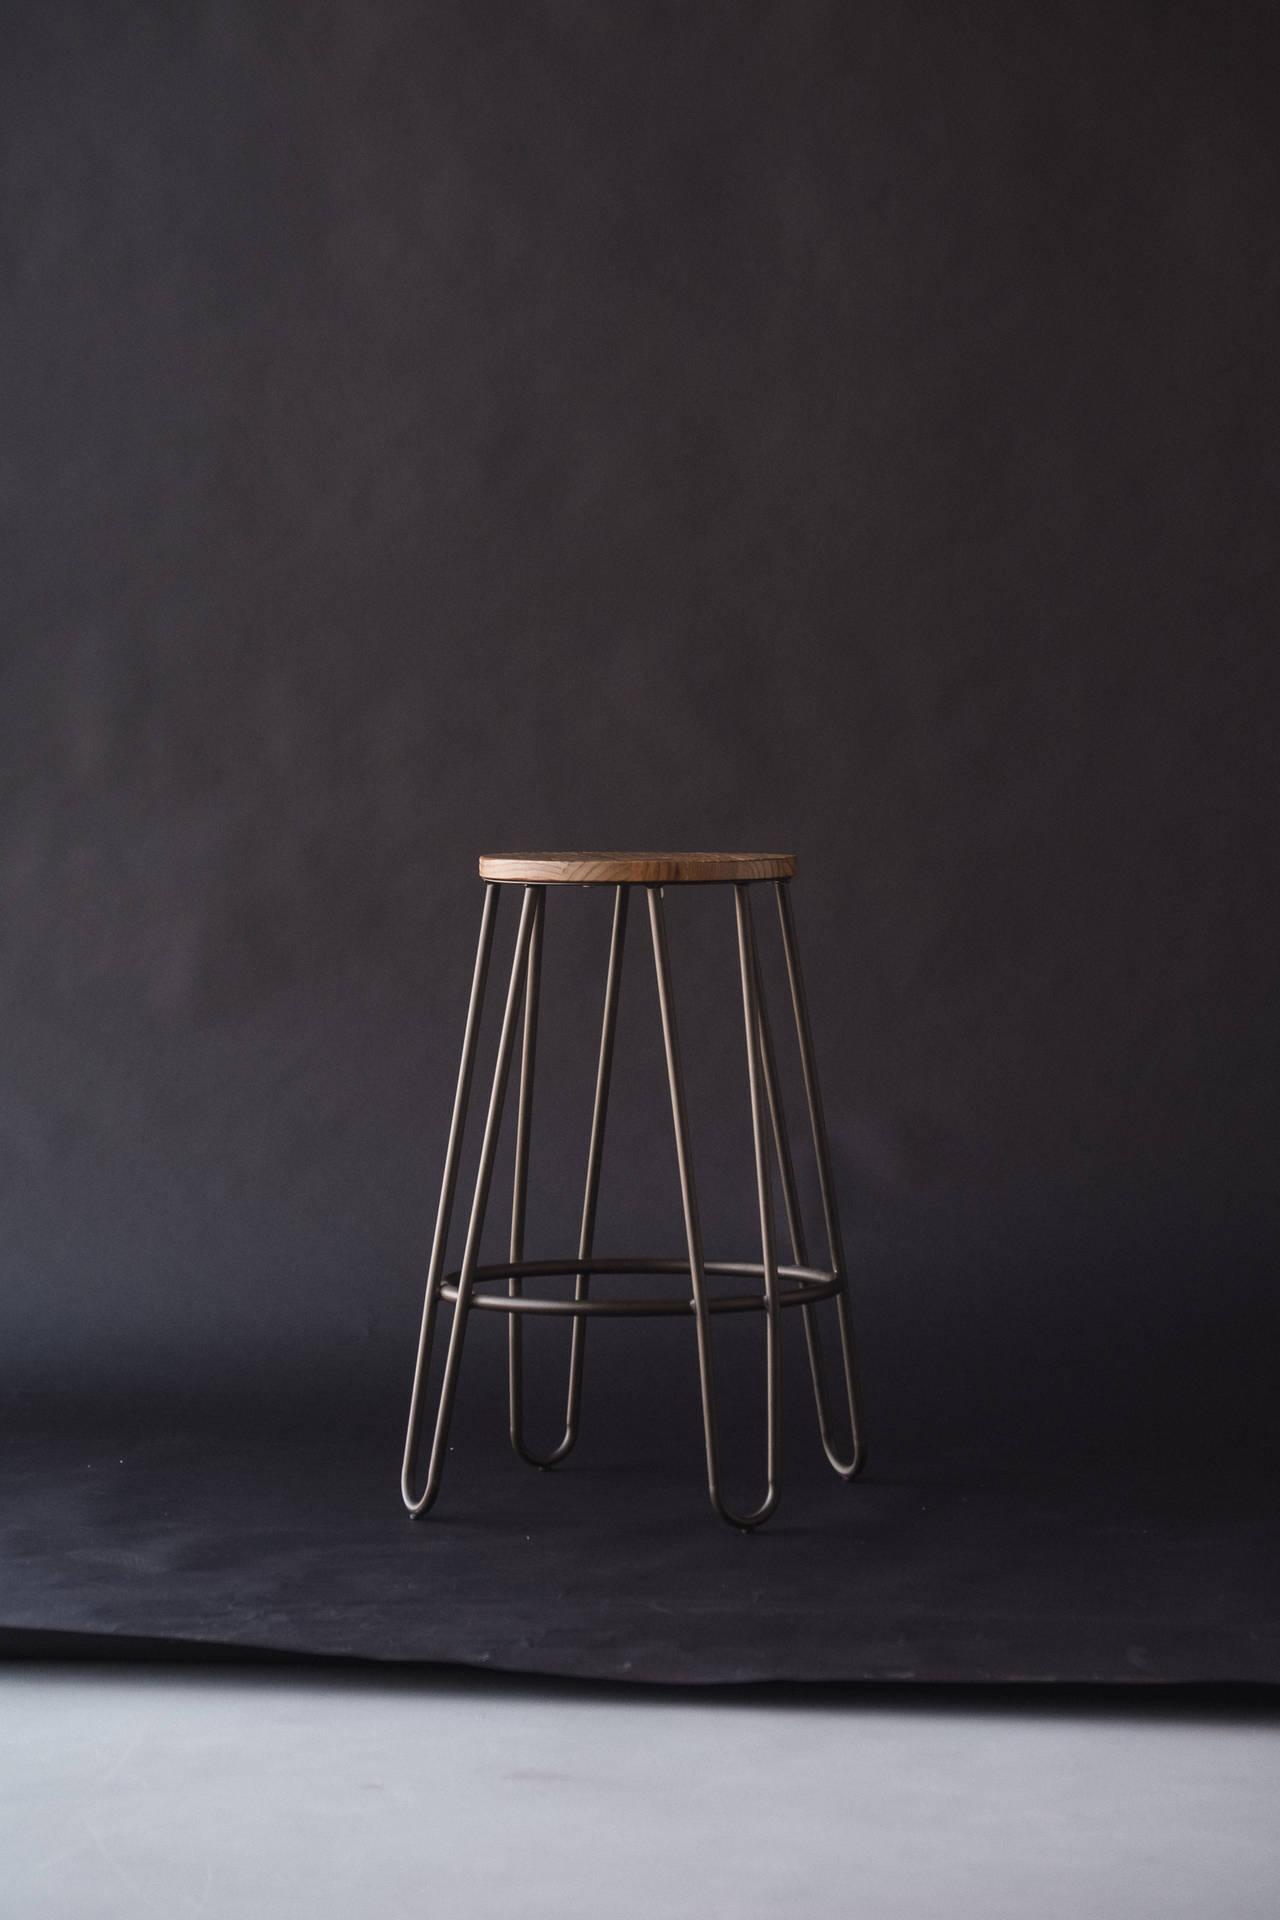 Lonely Wooden Stool With Black Background Background